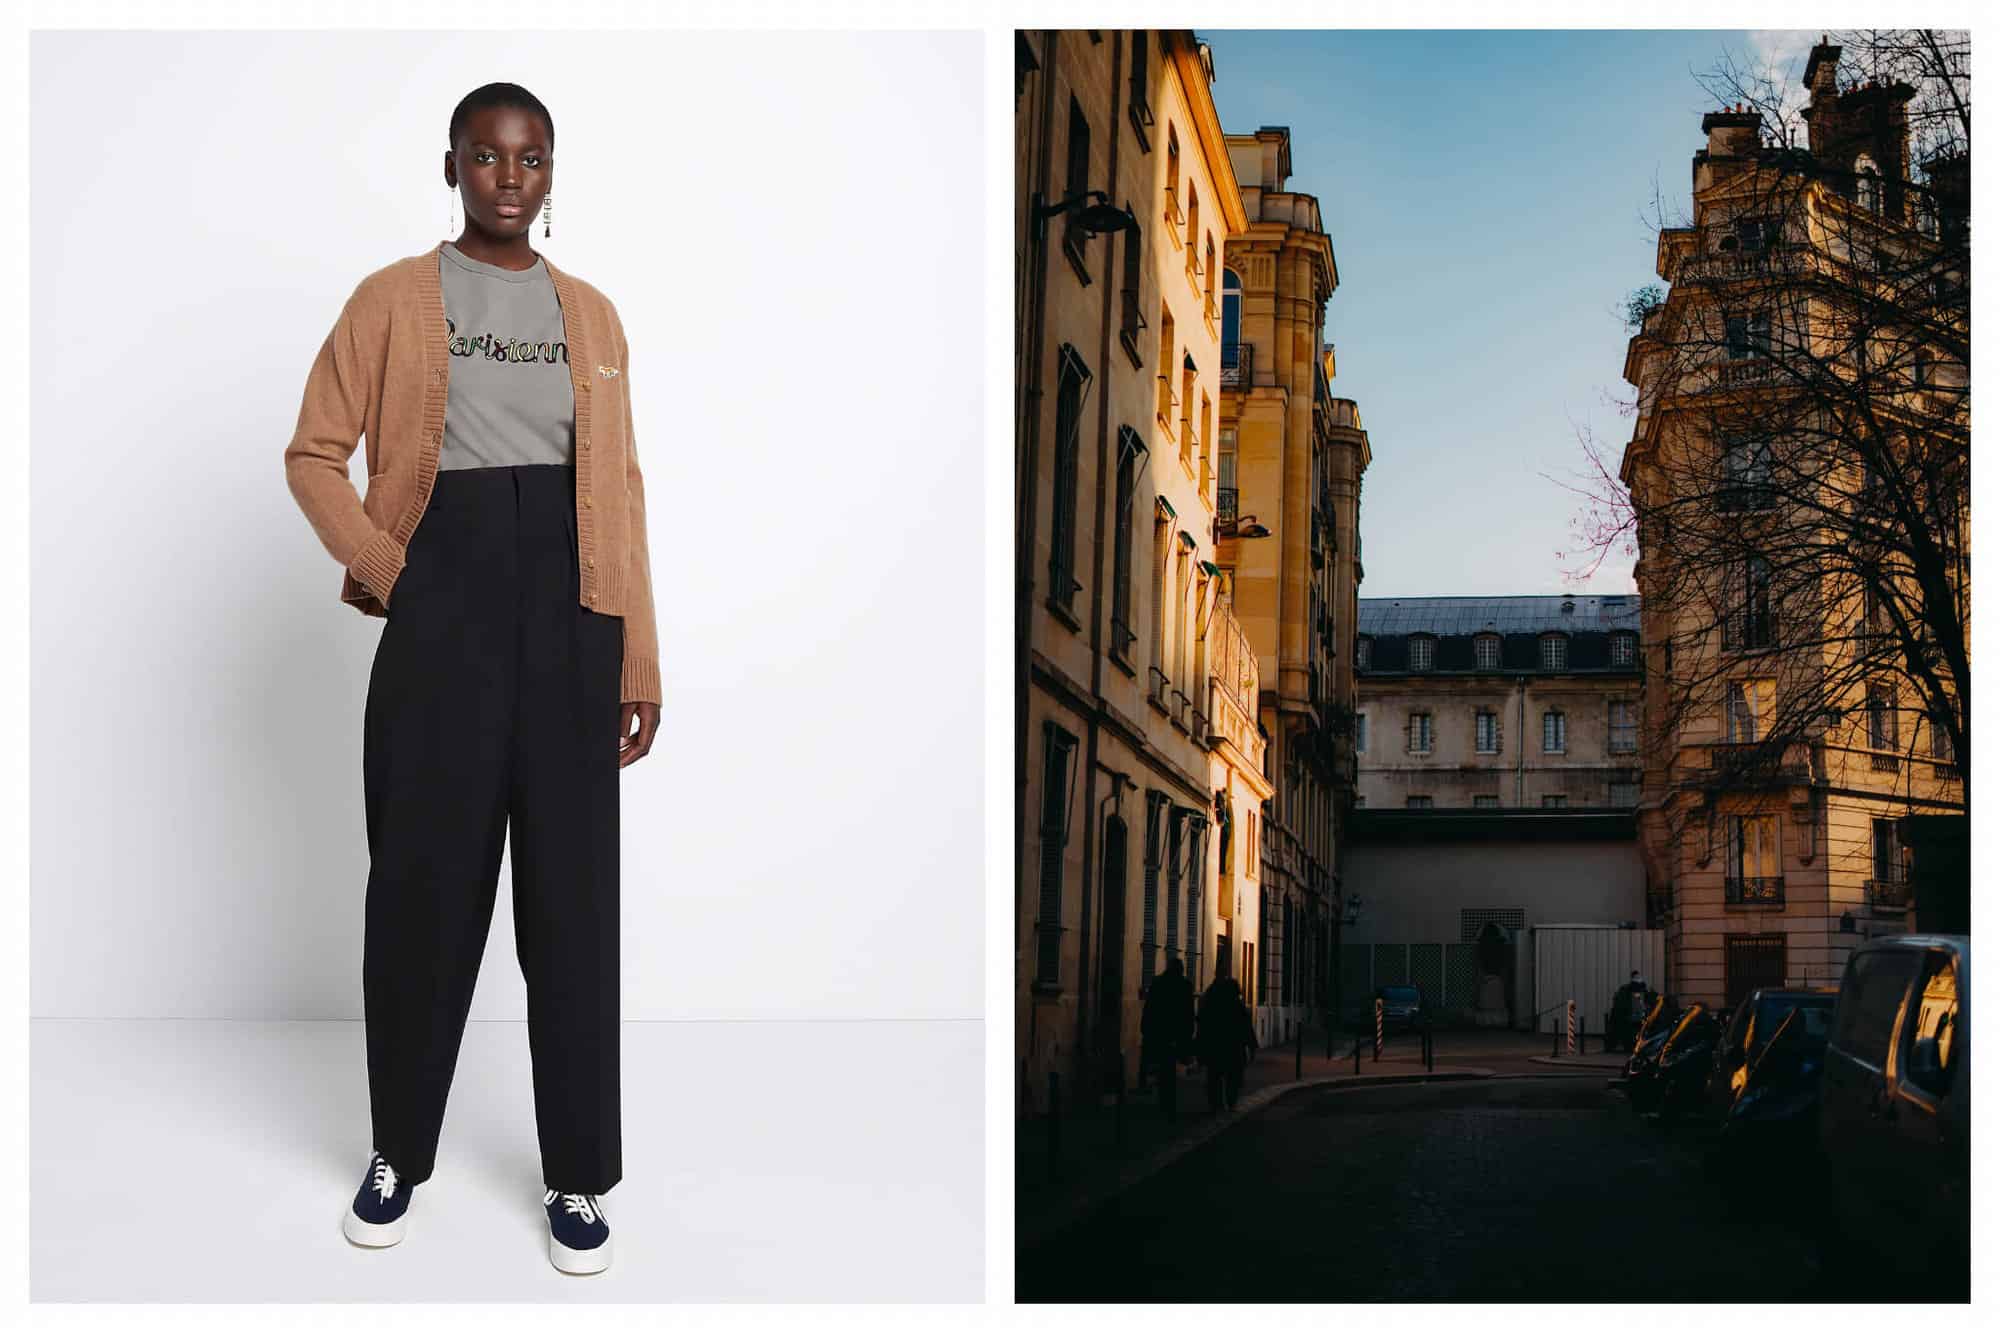 Left: a black woman with closely cut short black hair models black trousers, a grey t-shirt and tan cardigan from Maison Kitsuné. Right: photo of Hausmann buildings in Paris pictured at sunset. 